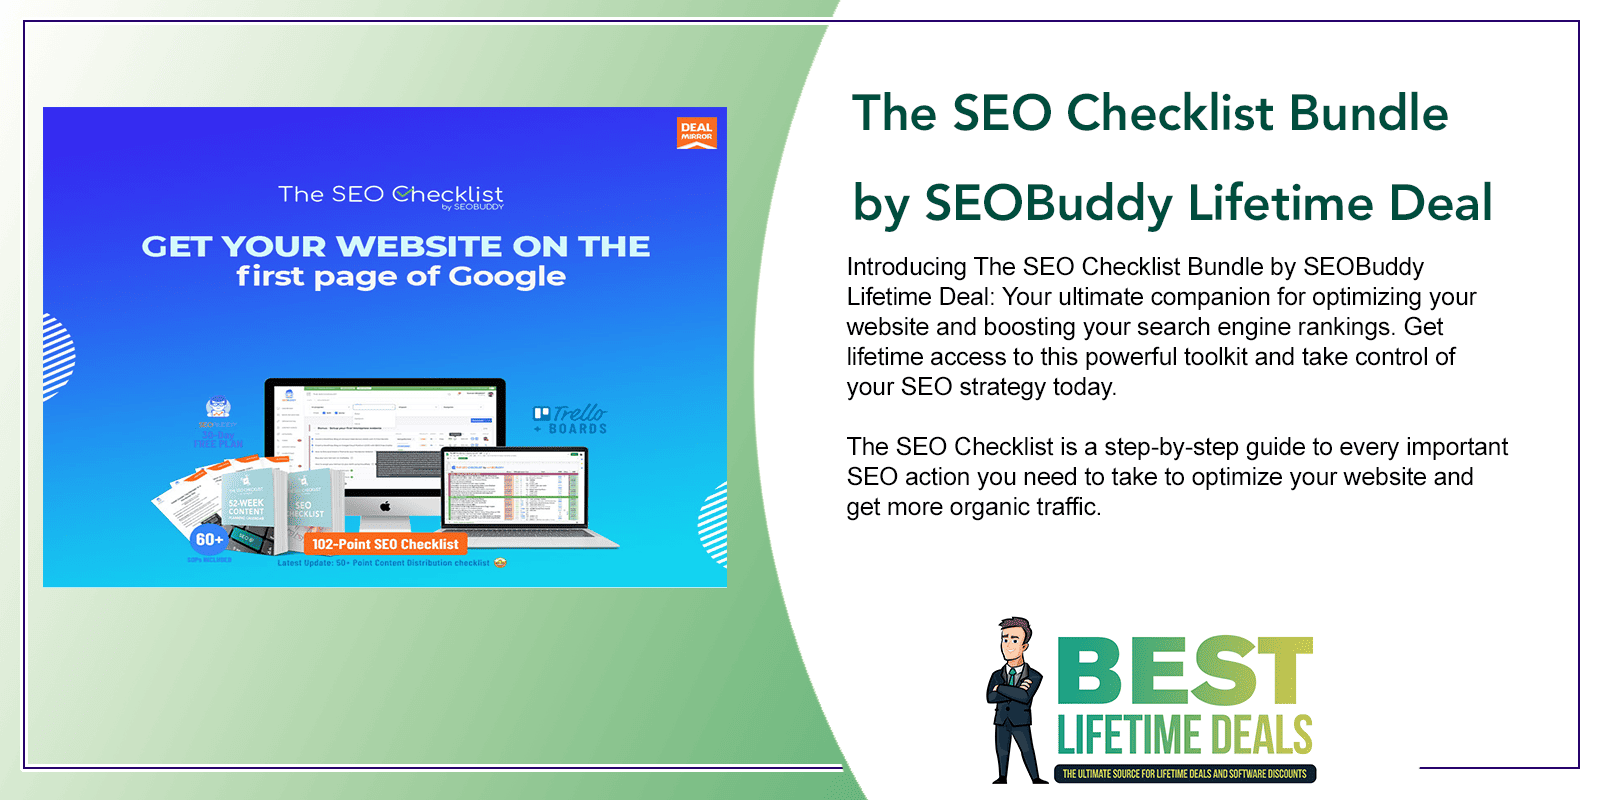 The SEO Checklist Bundle by SEOBuddy Lifetime Deal Featured Image